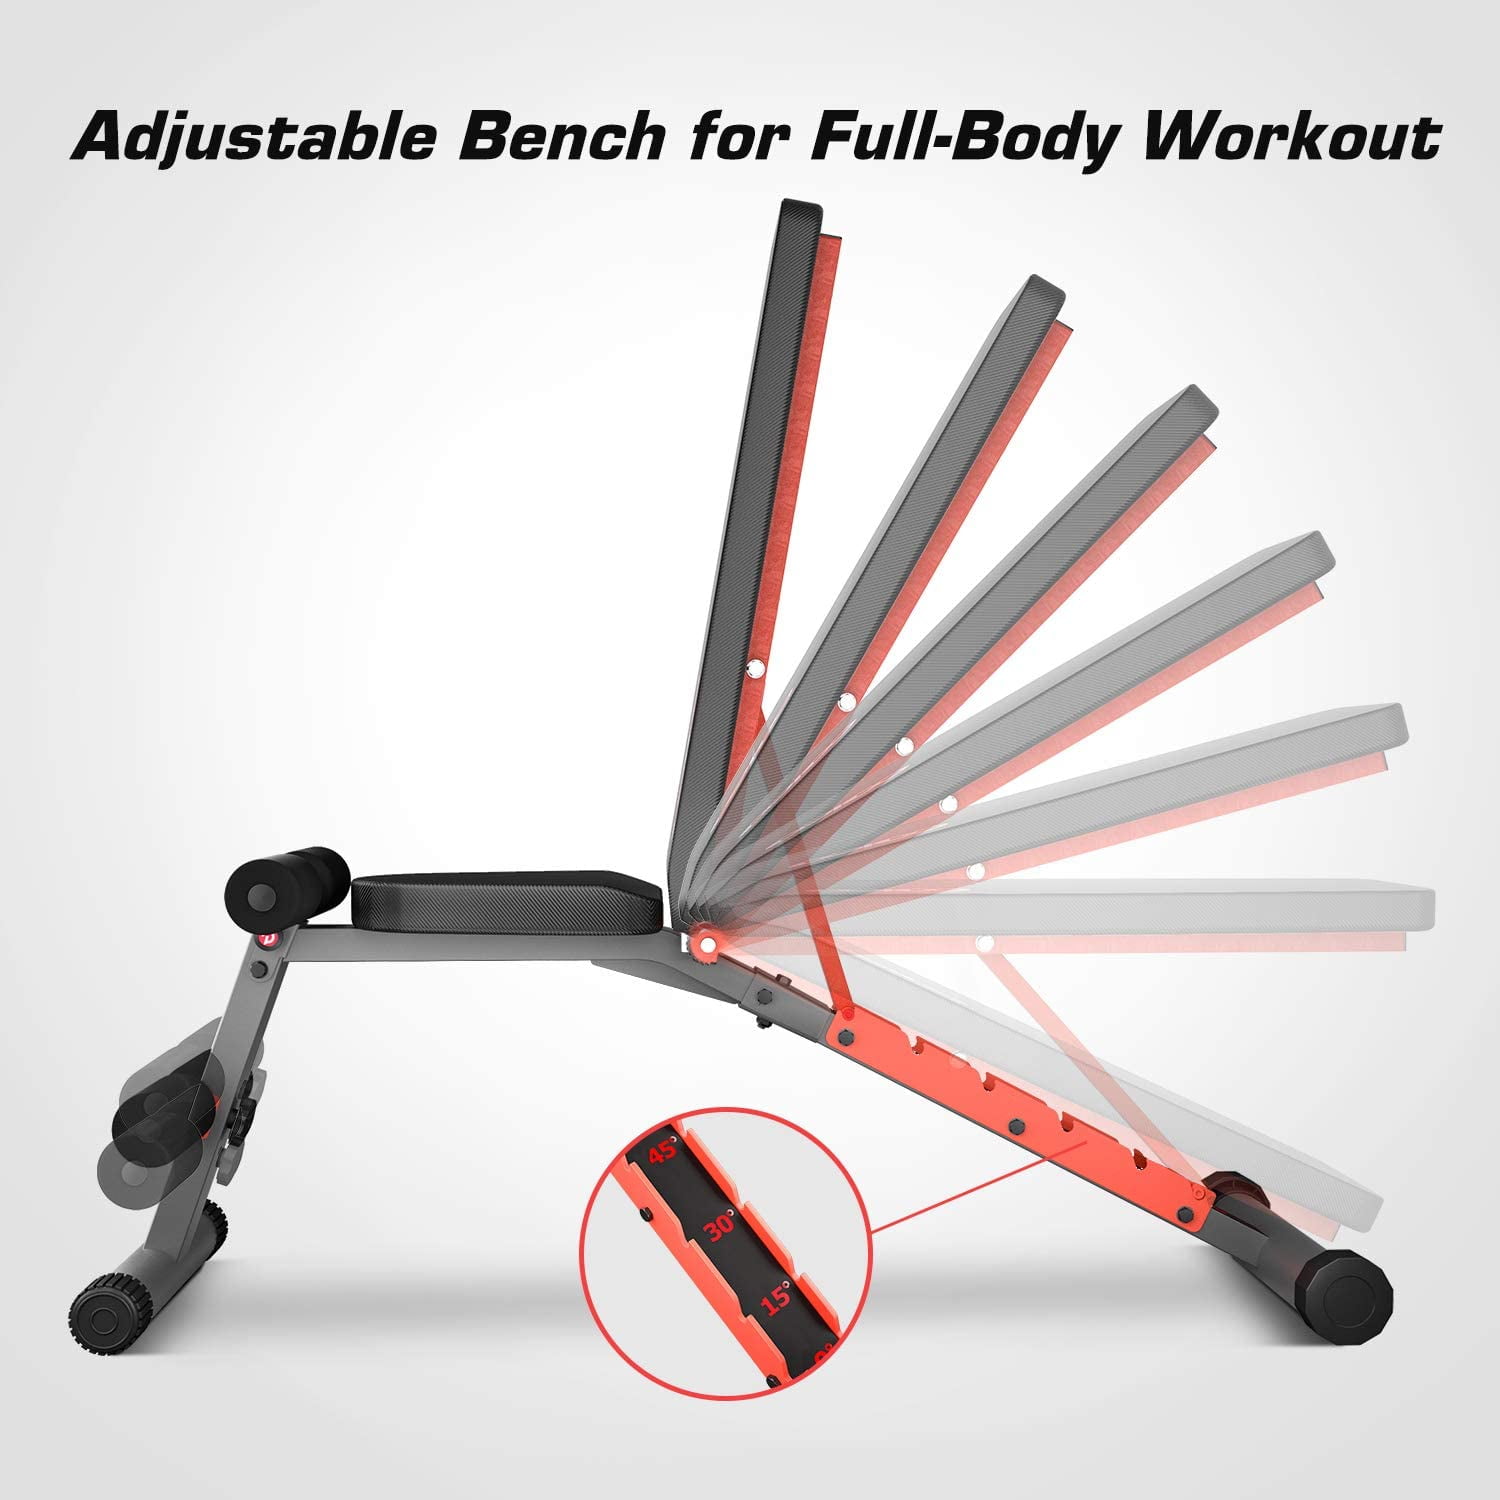 Adjustable Weight Bench Yaumany 6 Position Incline Decline Ergonomic EVA Padding Foldable for Dumbbell Exercise Weight Lifting Sit Up Multiuse Full Body Workout with Resistance Bands 2 Year Warranty